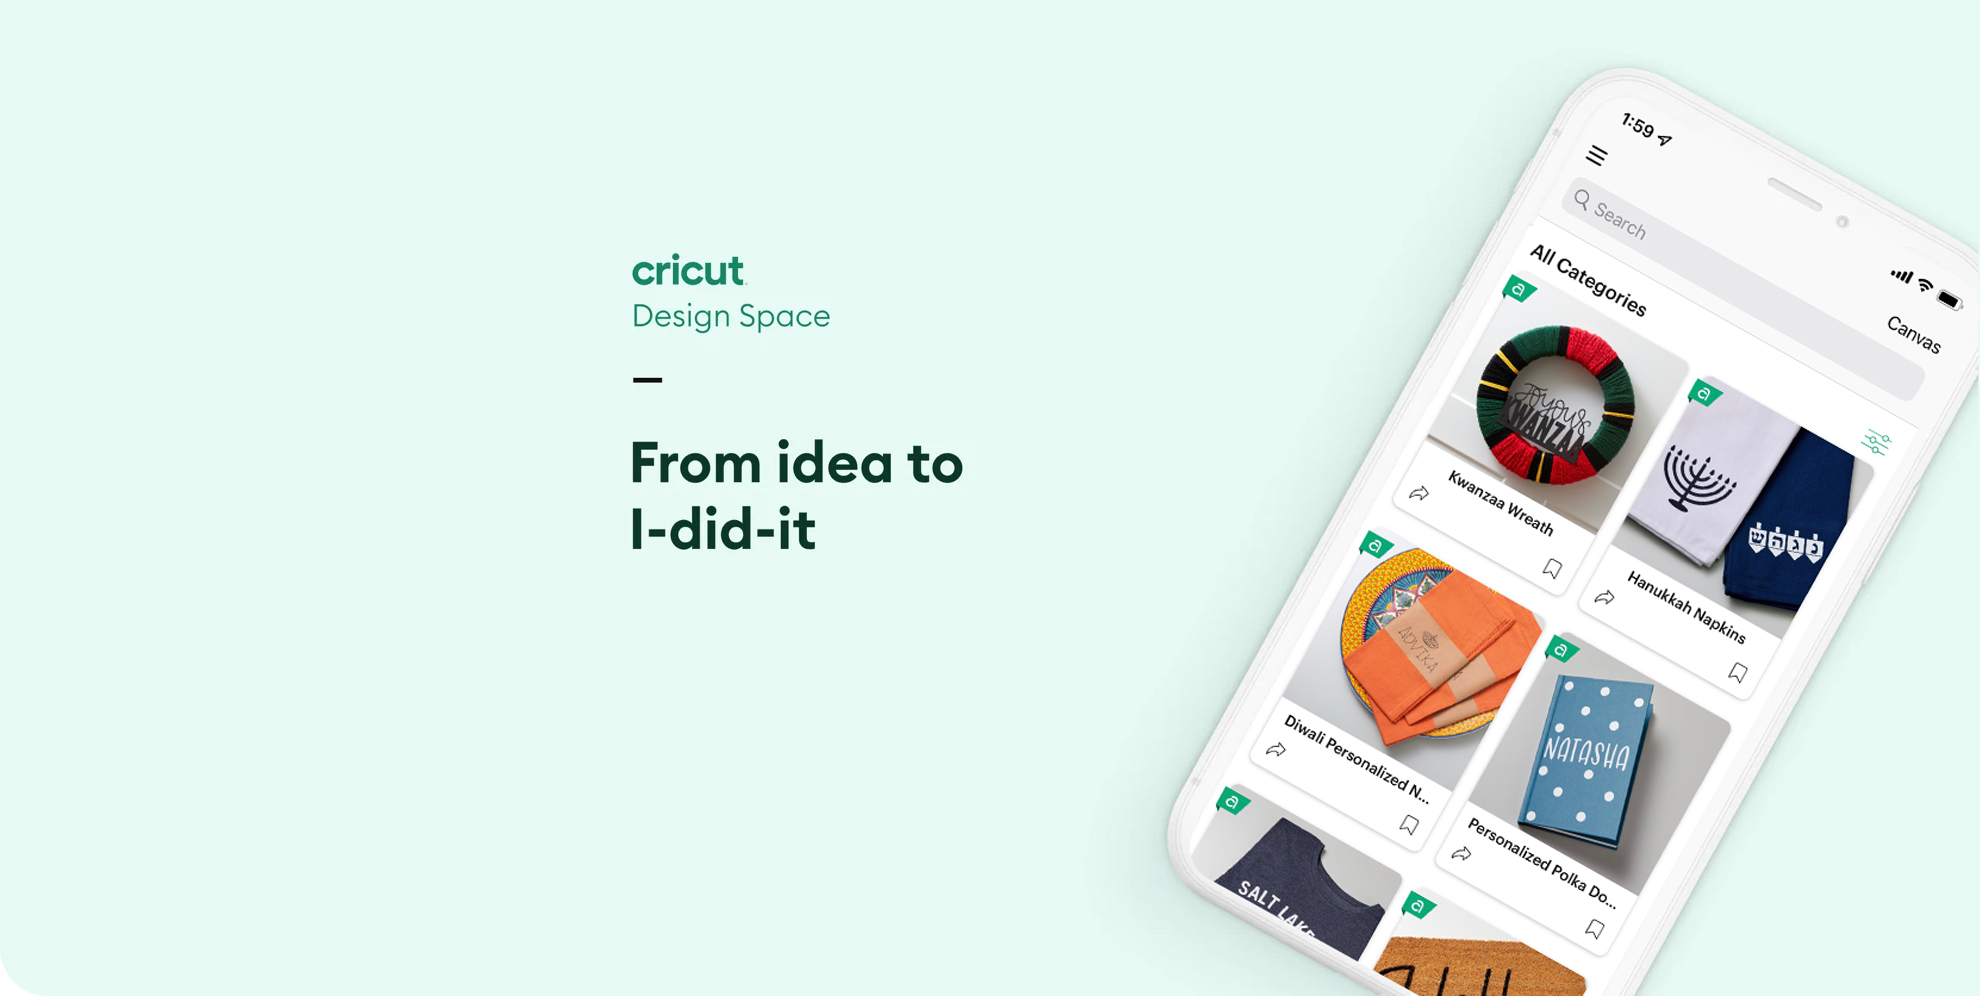 Design Space app for iOS gets a refresh